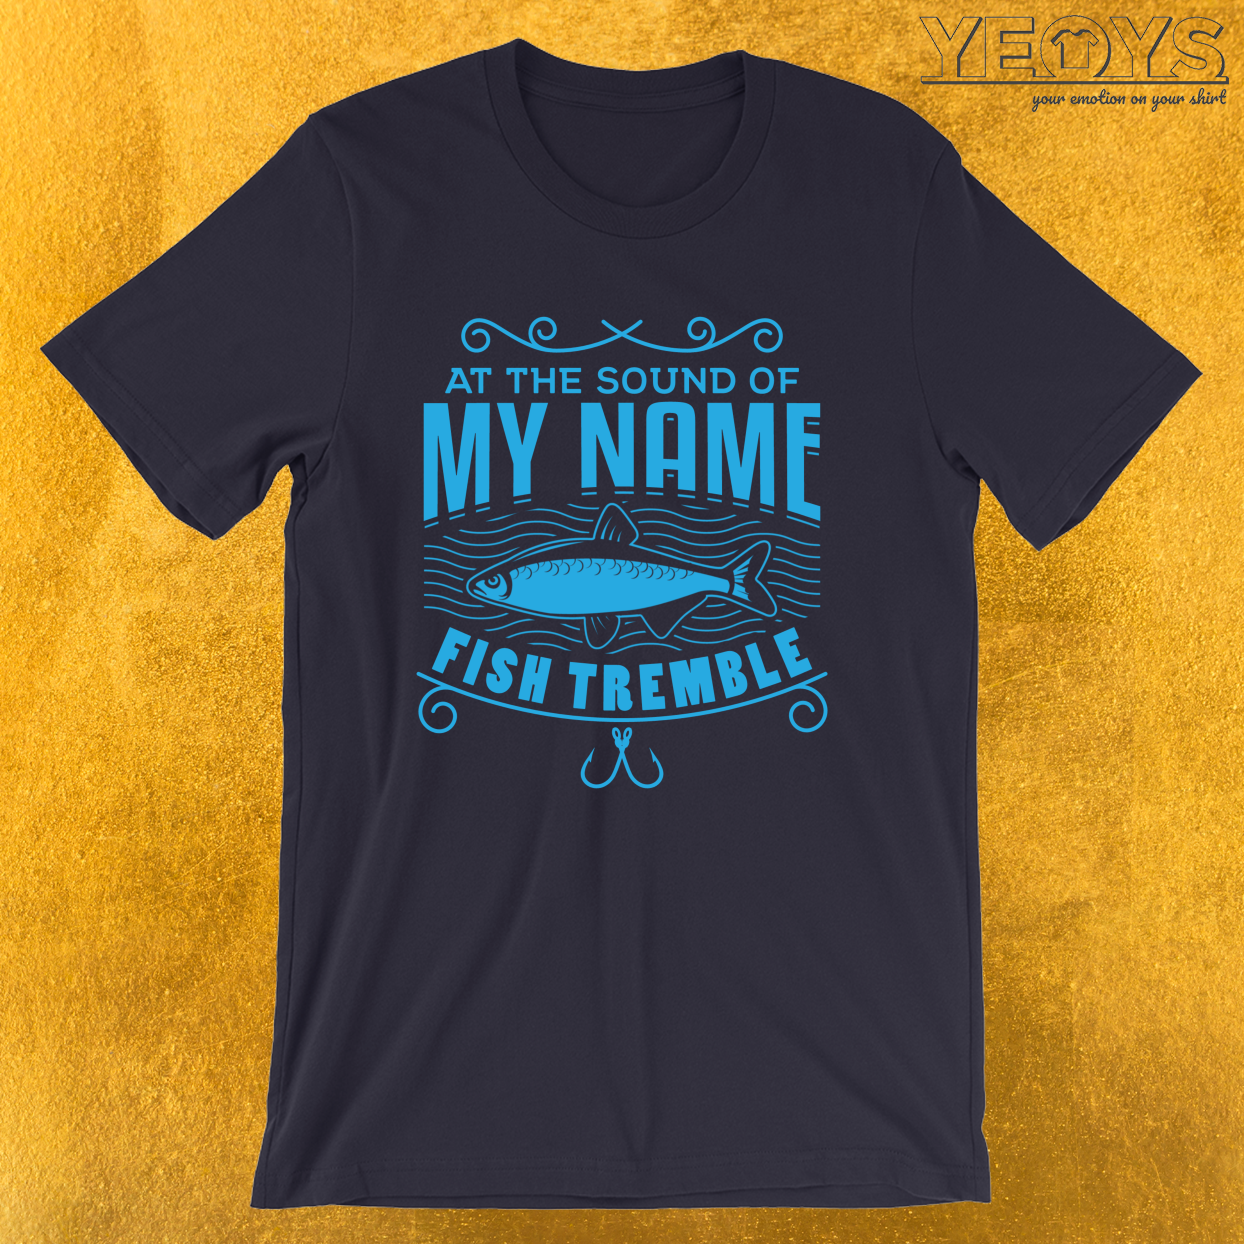 At The Sound Of My Name Fish Tremble – Funny Fishing Tee